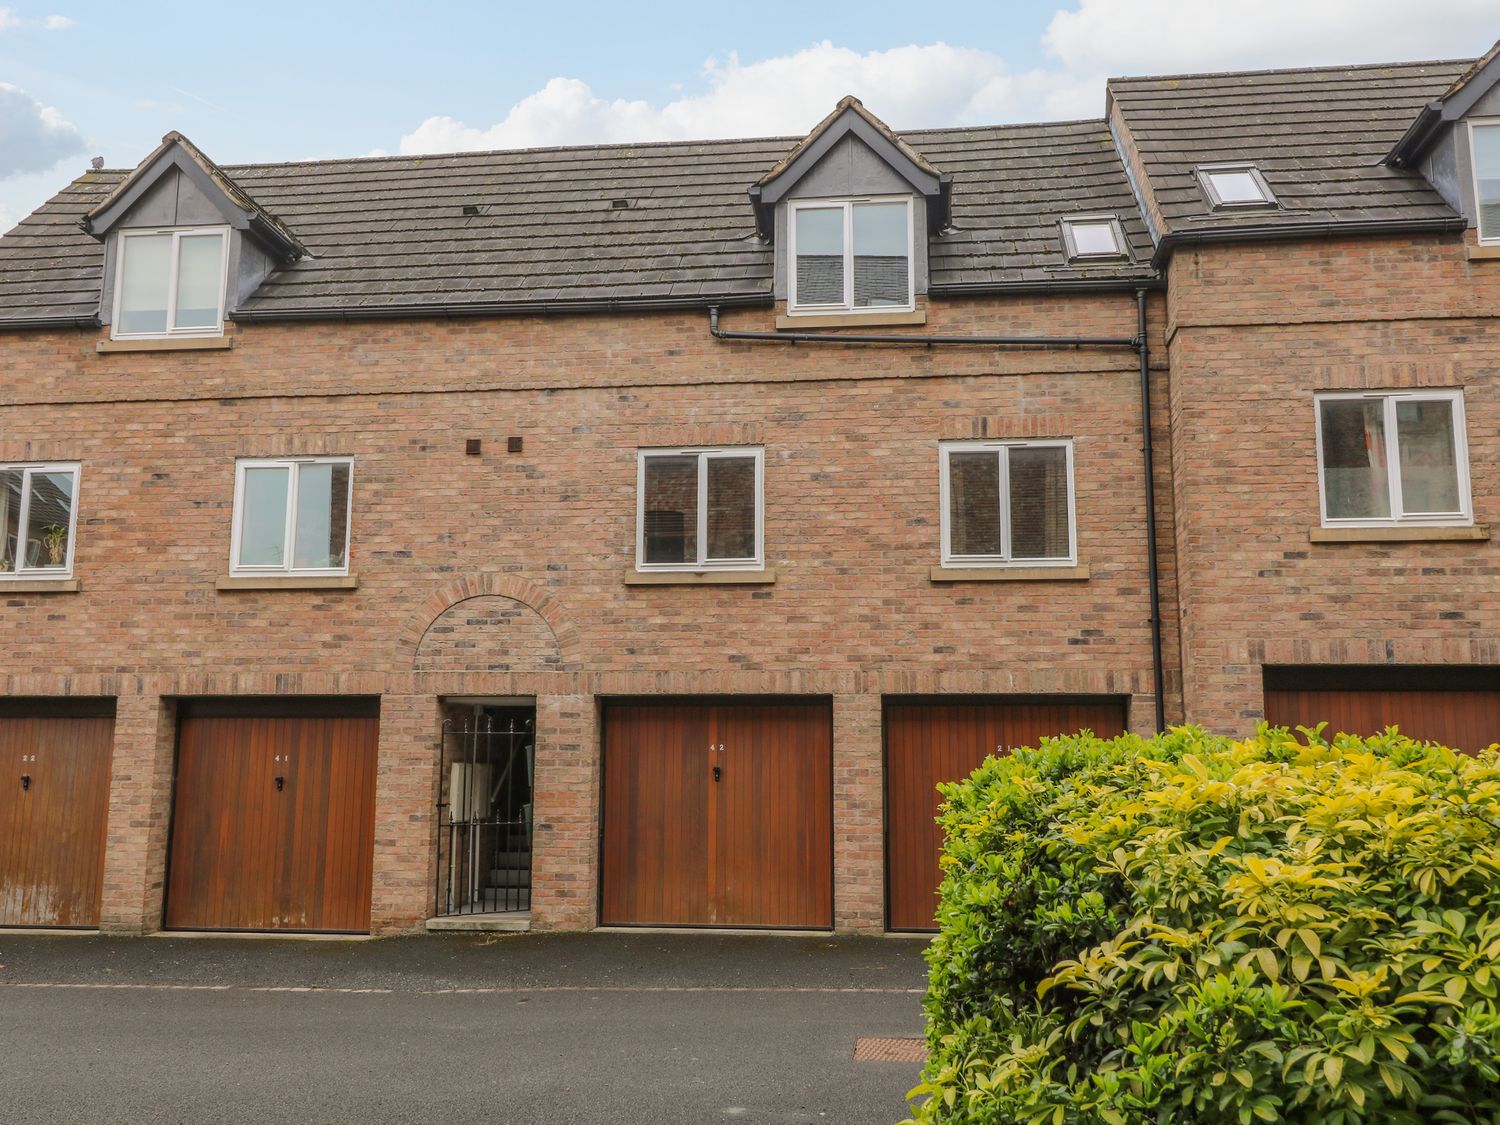 42 Tannery Mews - North Yorkshire (incl. Whitby) - 1086985 - photo 1